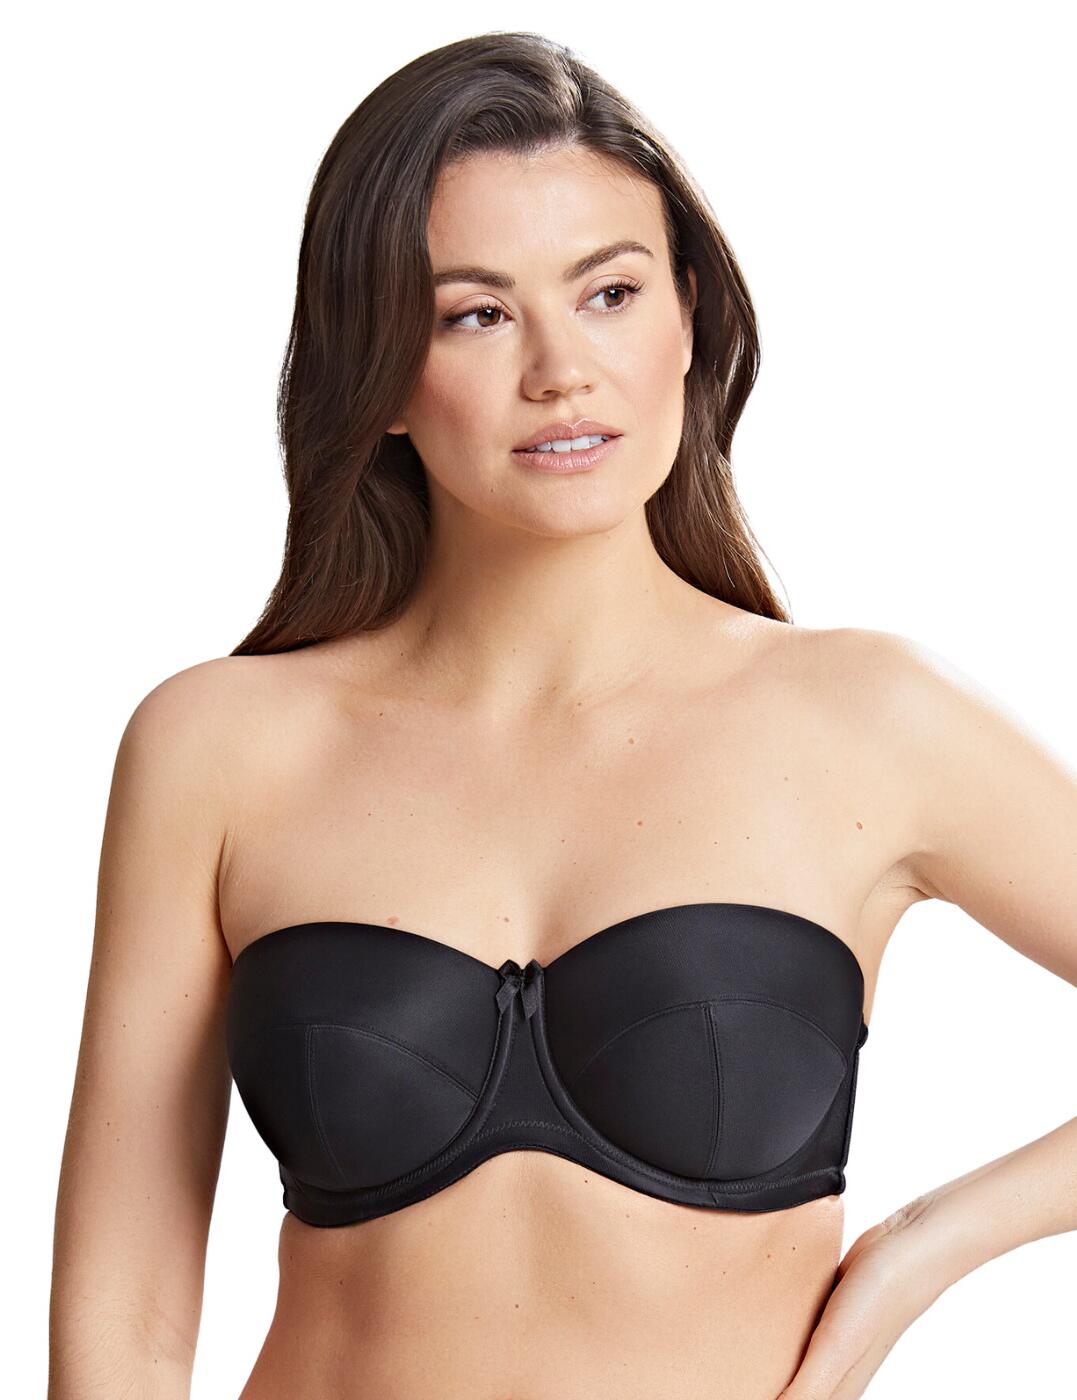 Panache Evie Strapless Bra 5320 Underwired Lingerie Moulded Padded